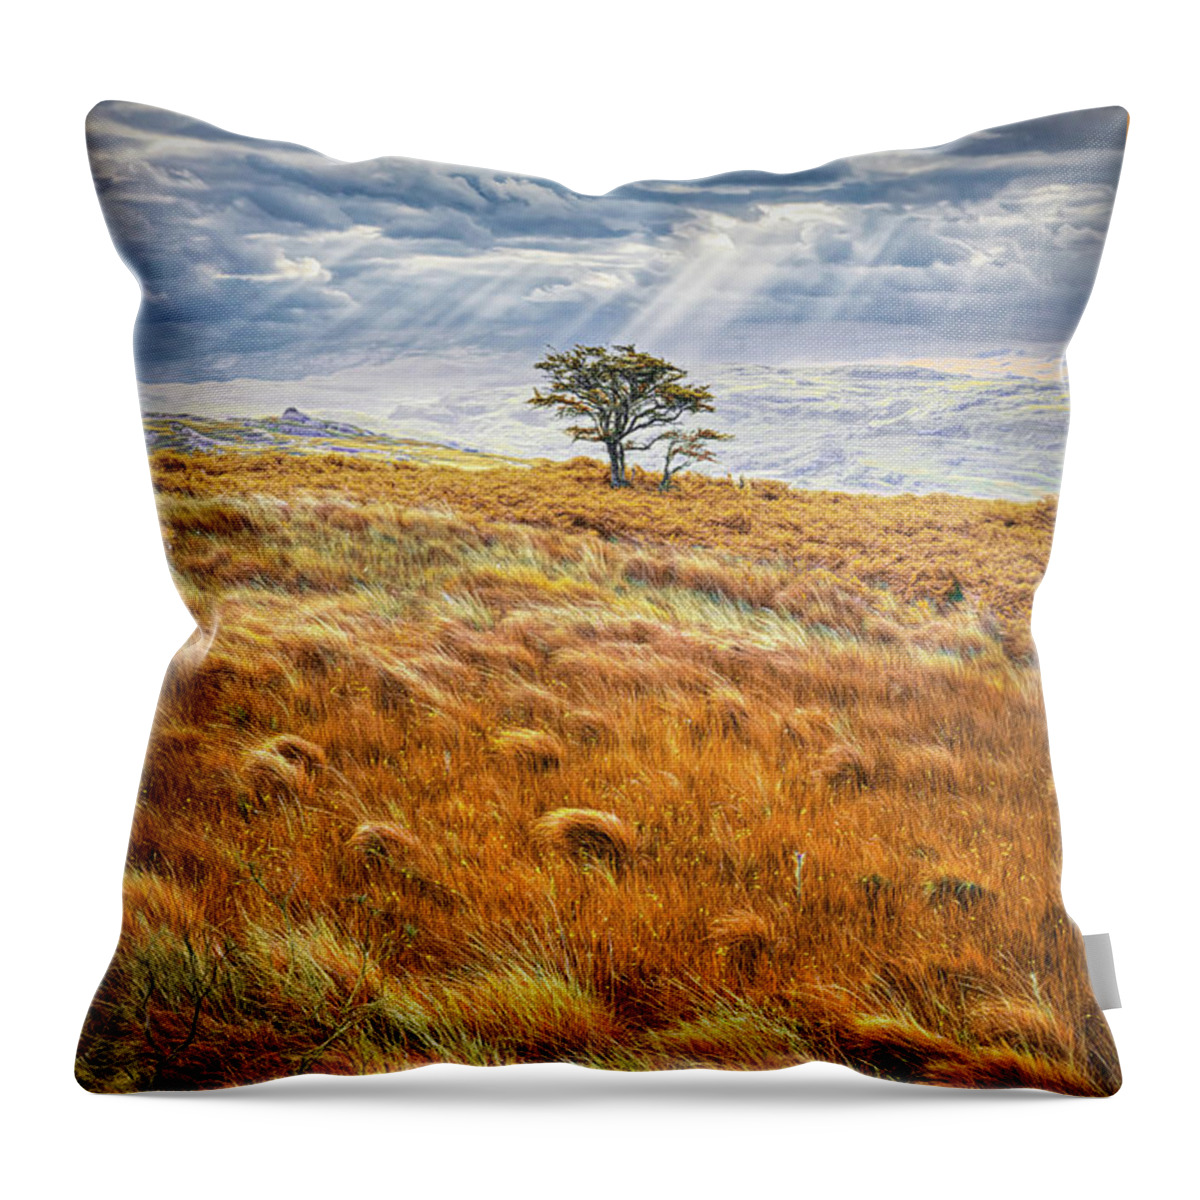 Clouds Throw Pillow featuring the photograph One Tree in the Autumn Irish Mist by Debra and Dave Vanderlaan